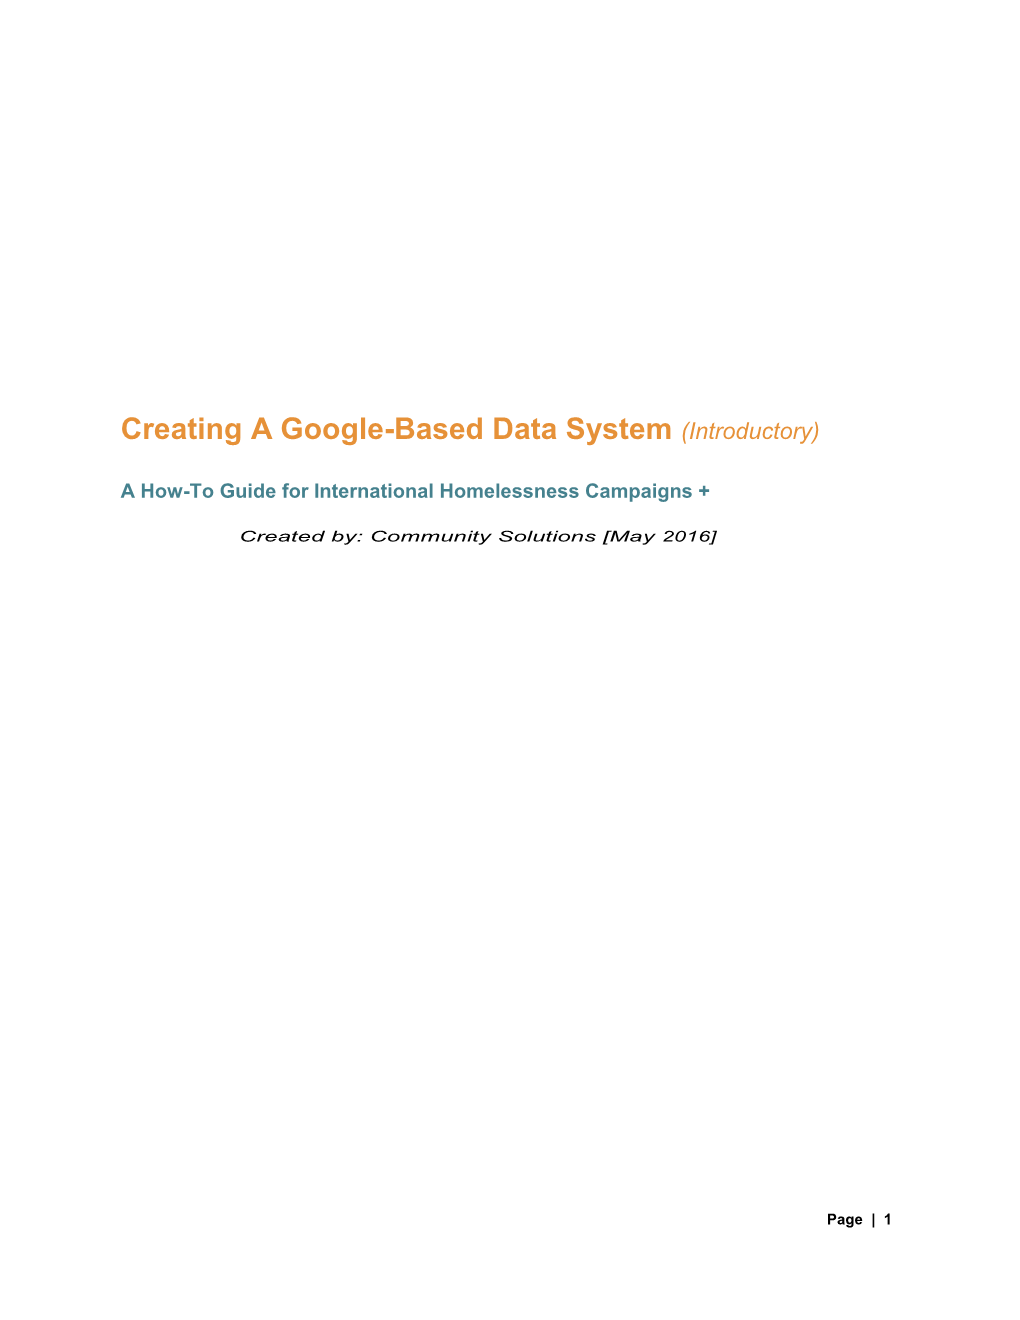 Creating a Google-Based Data System (Introductory)